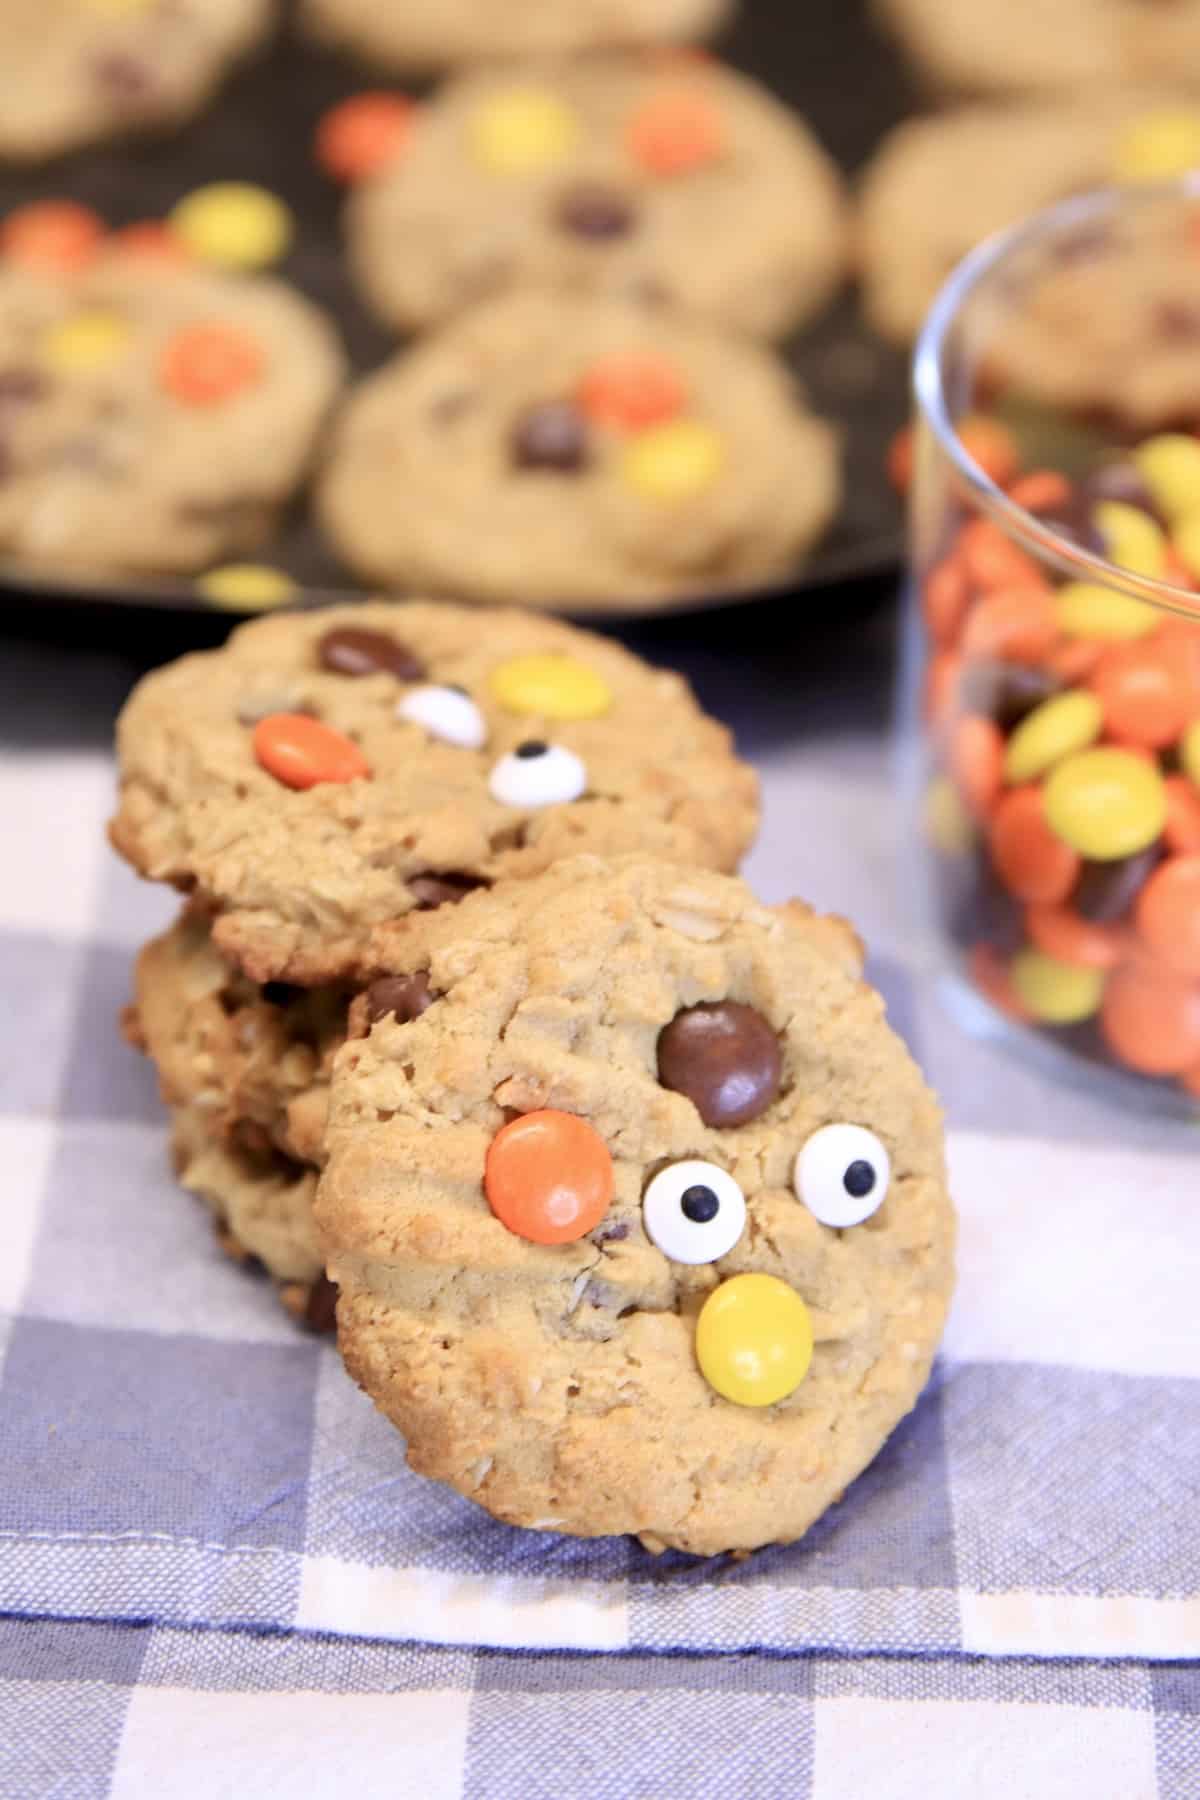 Reese's Pieces Monster Cookies with candy eyeballs for Halloween stacked.